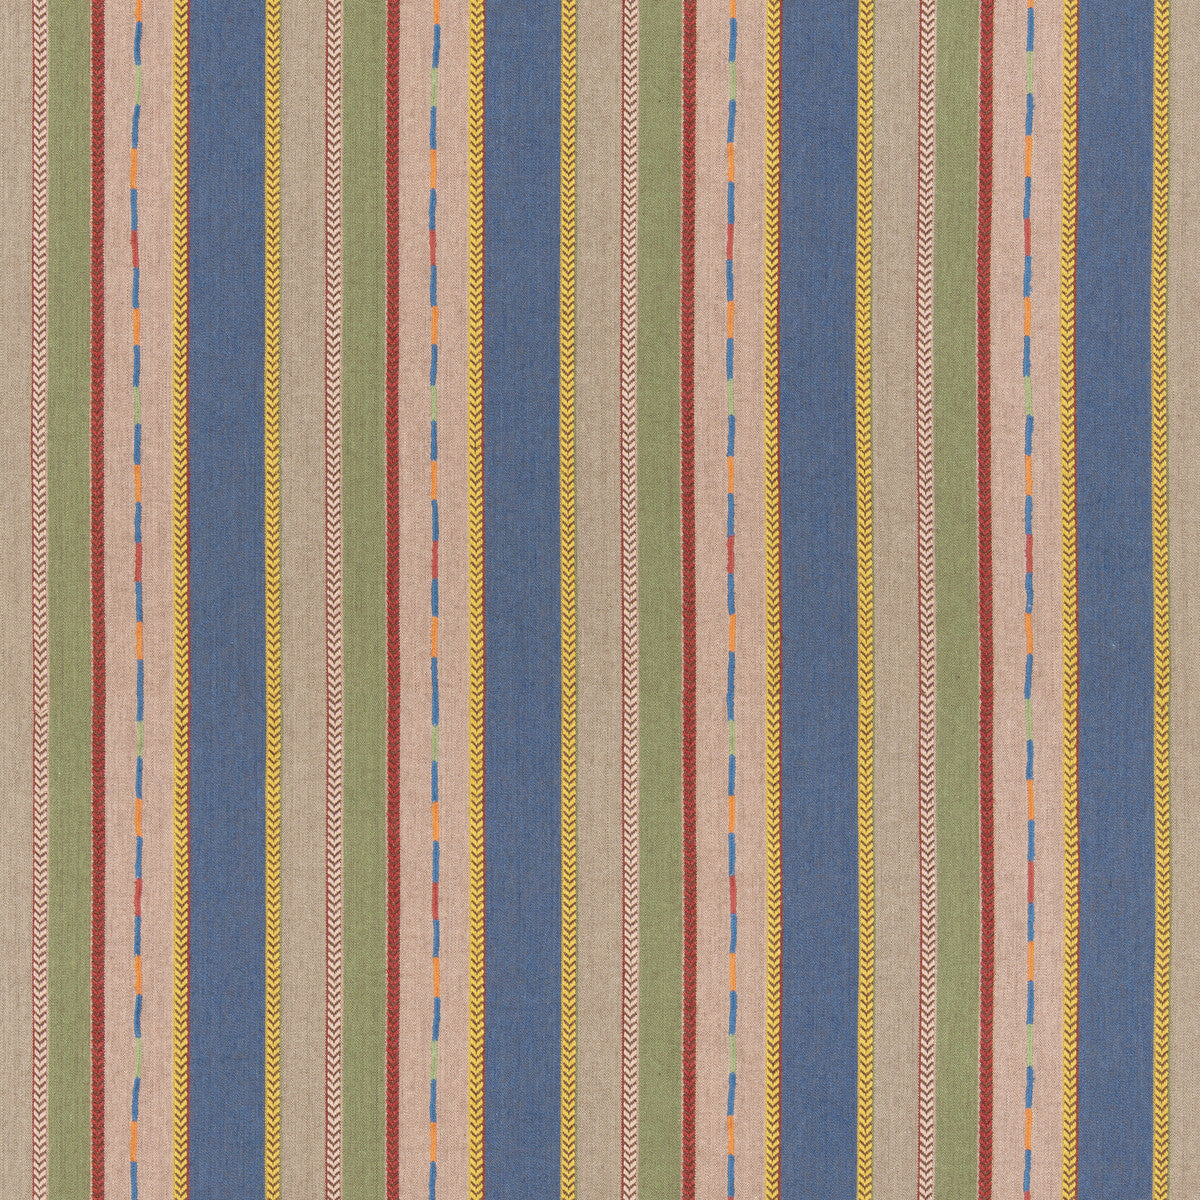 Bunty fabric in blue/green color - pattern BF11062.4.0 - by G P &amp; J Baker in the X Kit Kemp Stripes collection